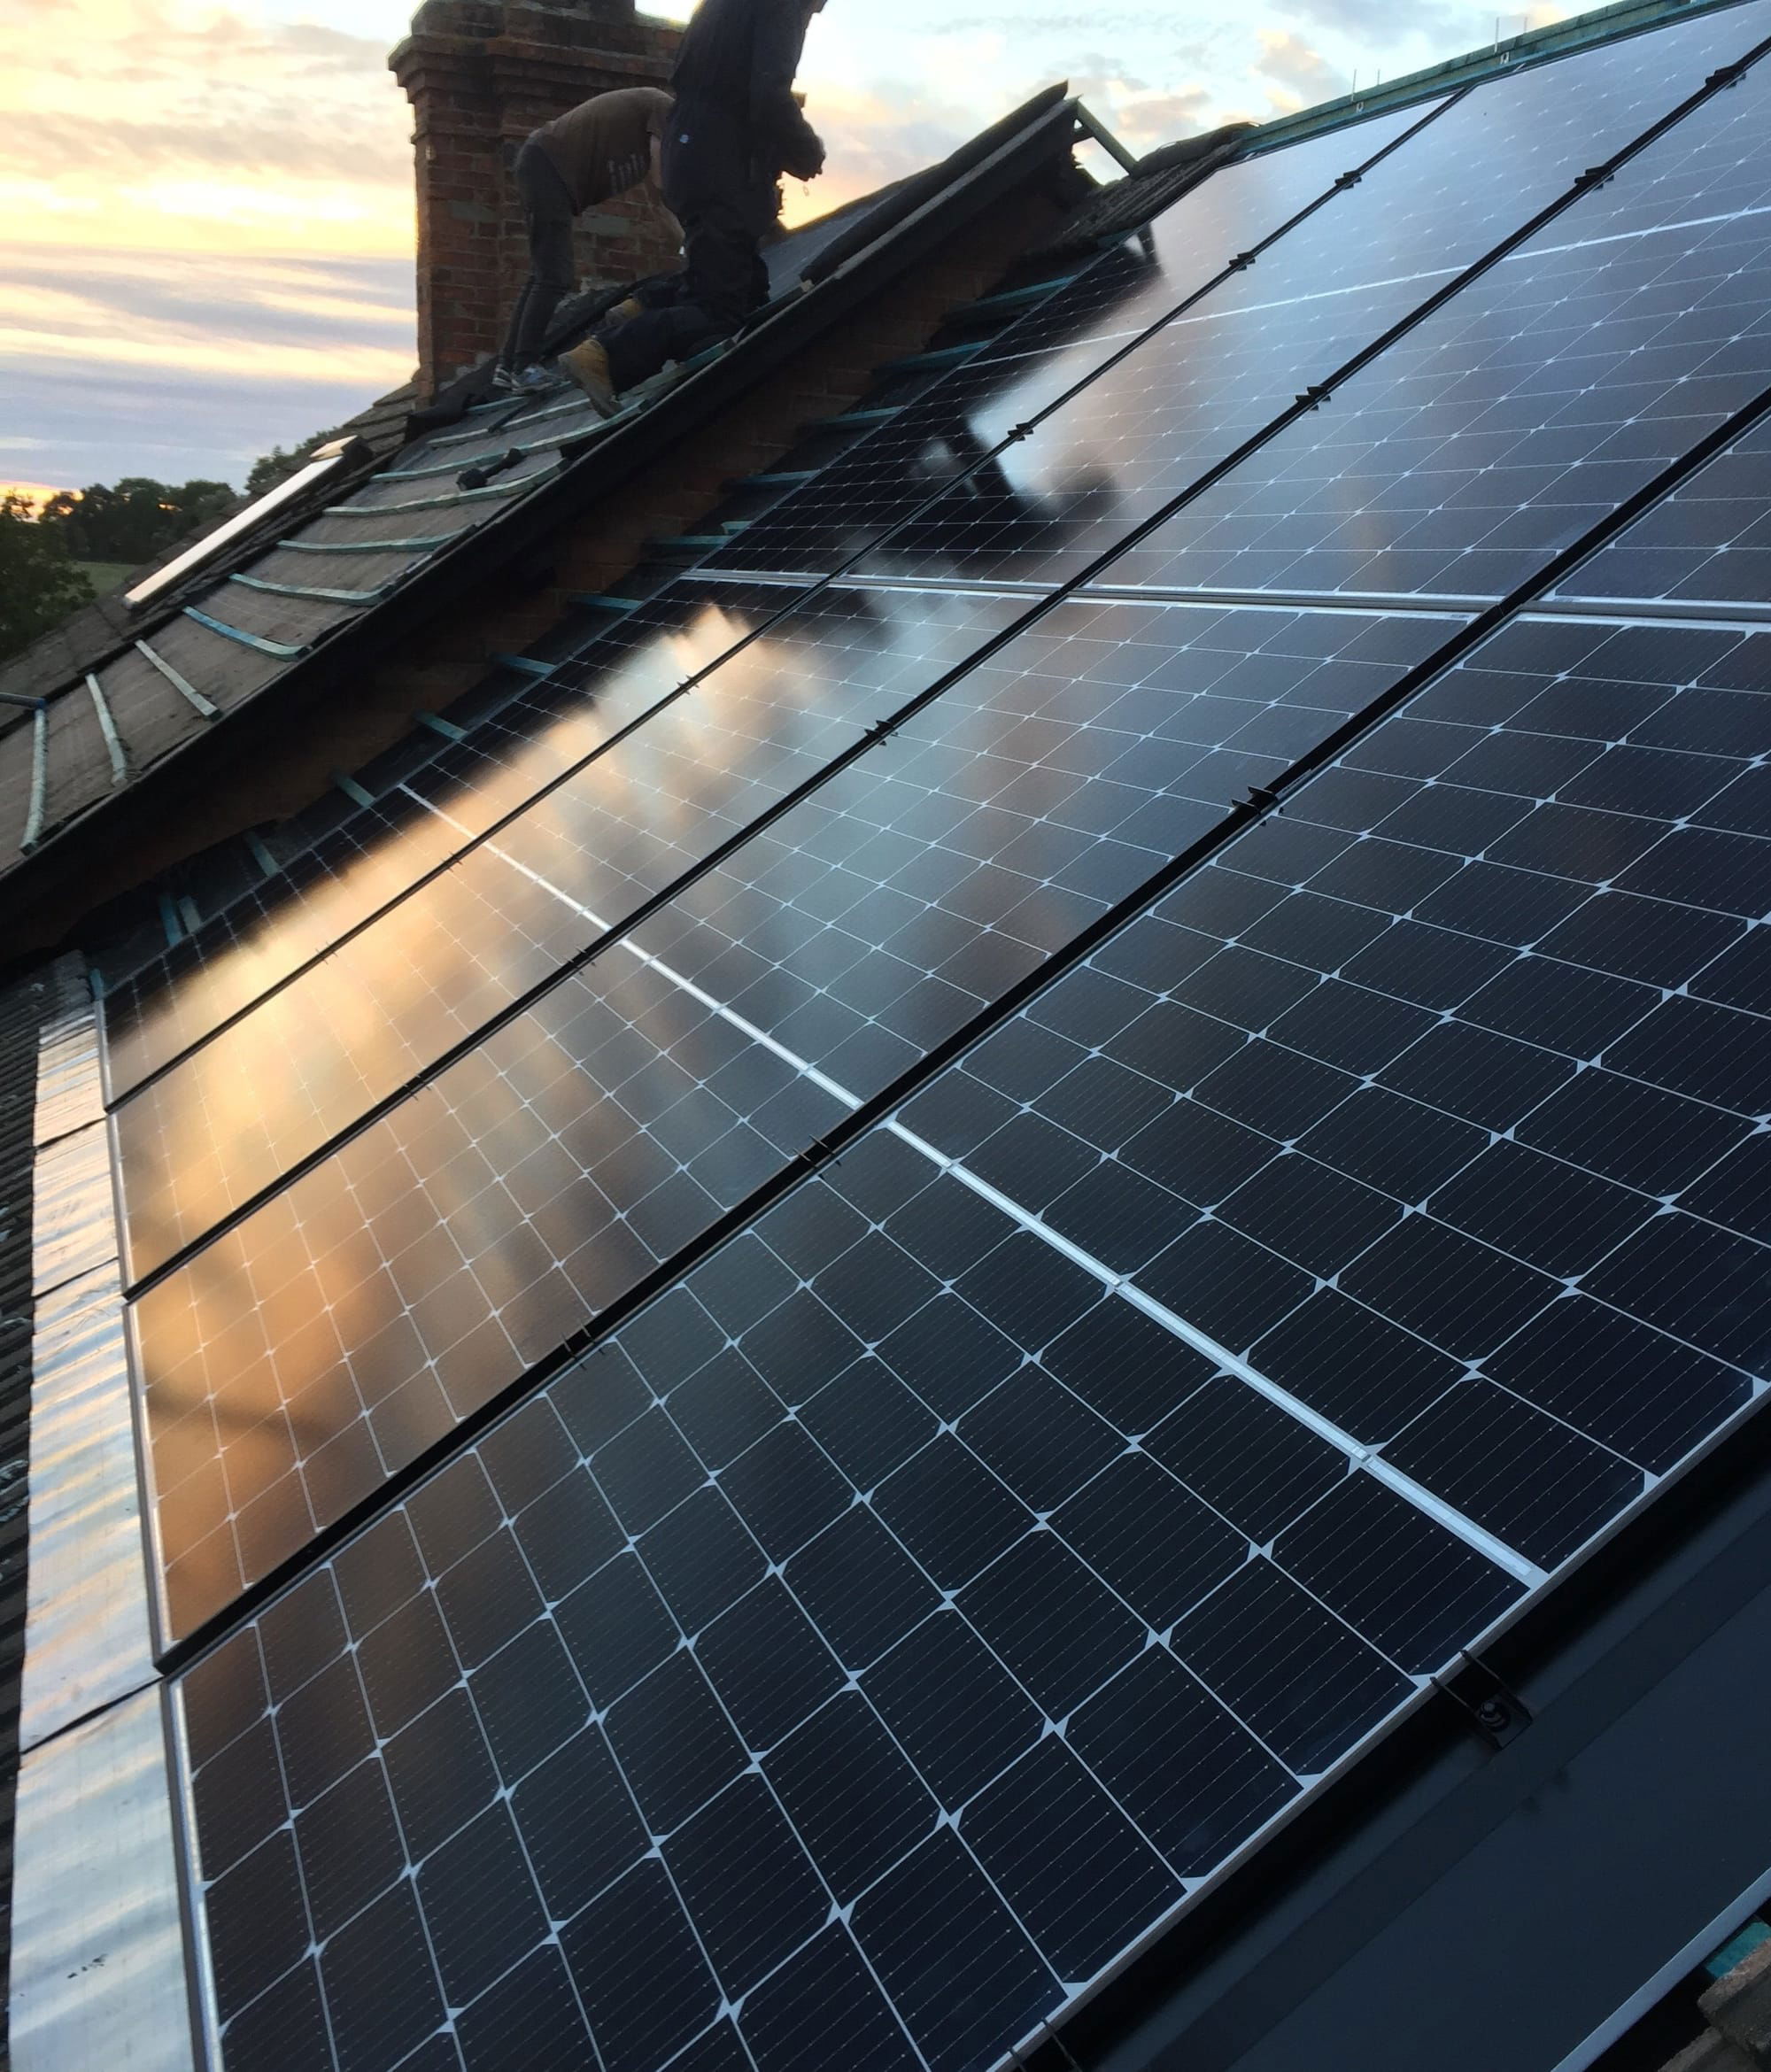 Solar Partner installs a 6.16 kWp in roof system